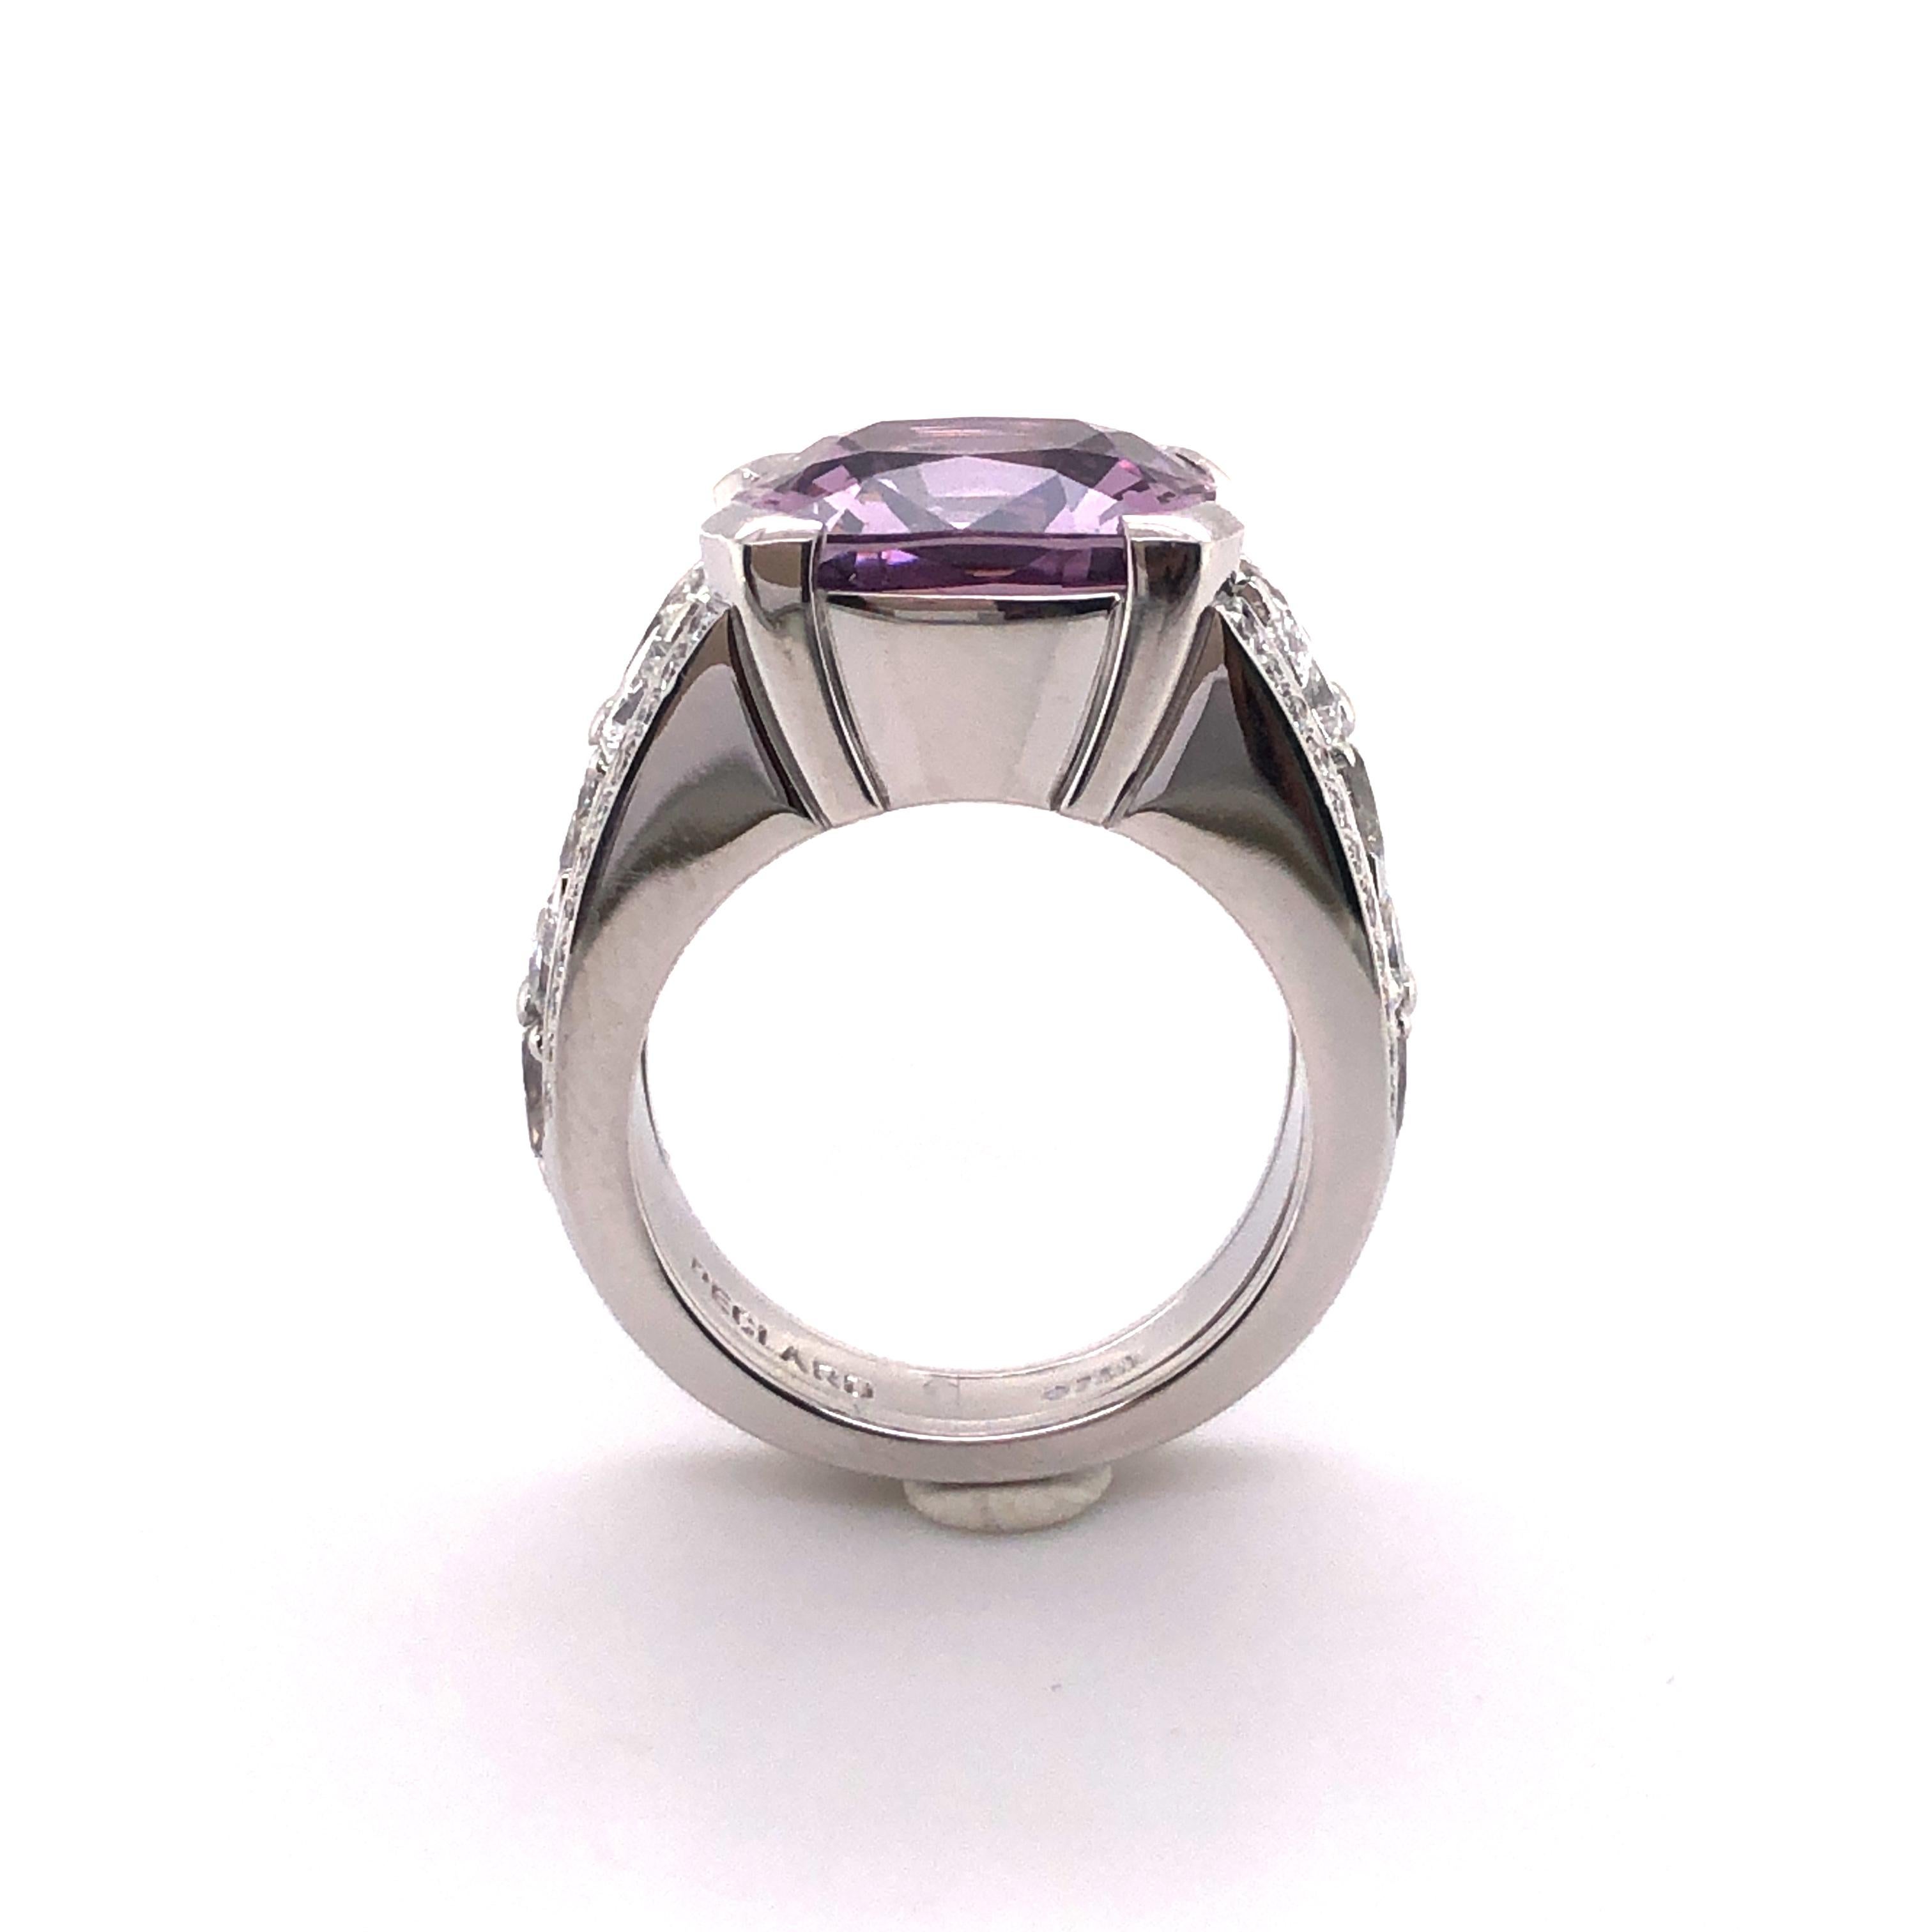 Certified 8.90 Ct Violet Burmese Spinel and Diamond Ring in 18 Karat White Gold For Sale 3